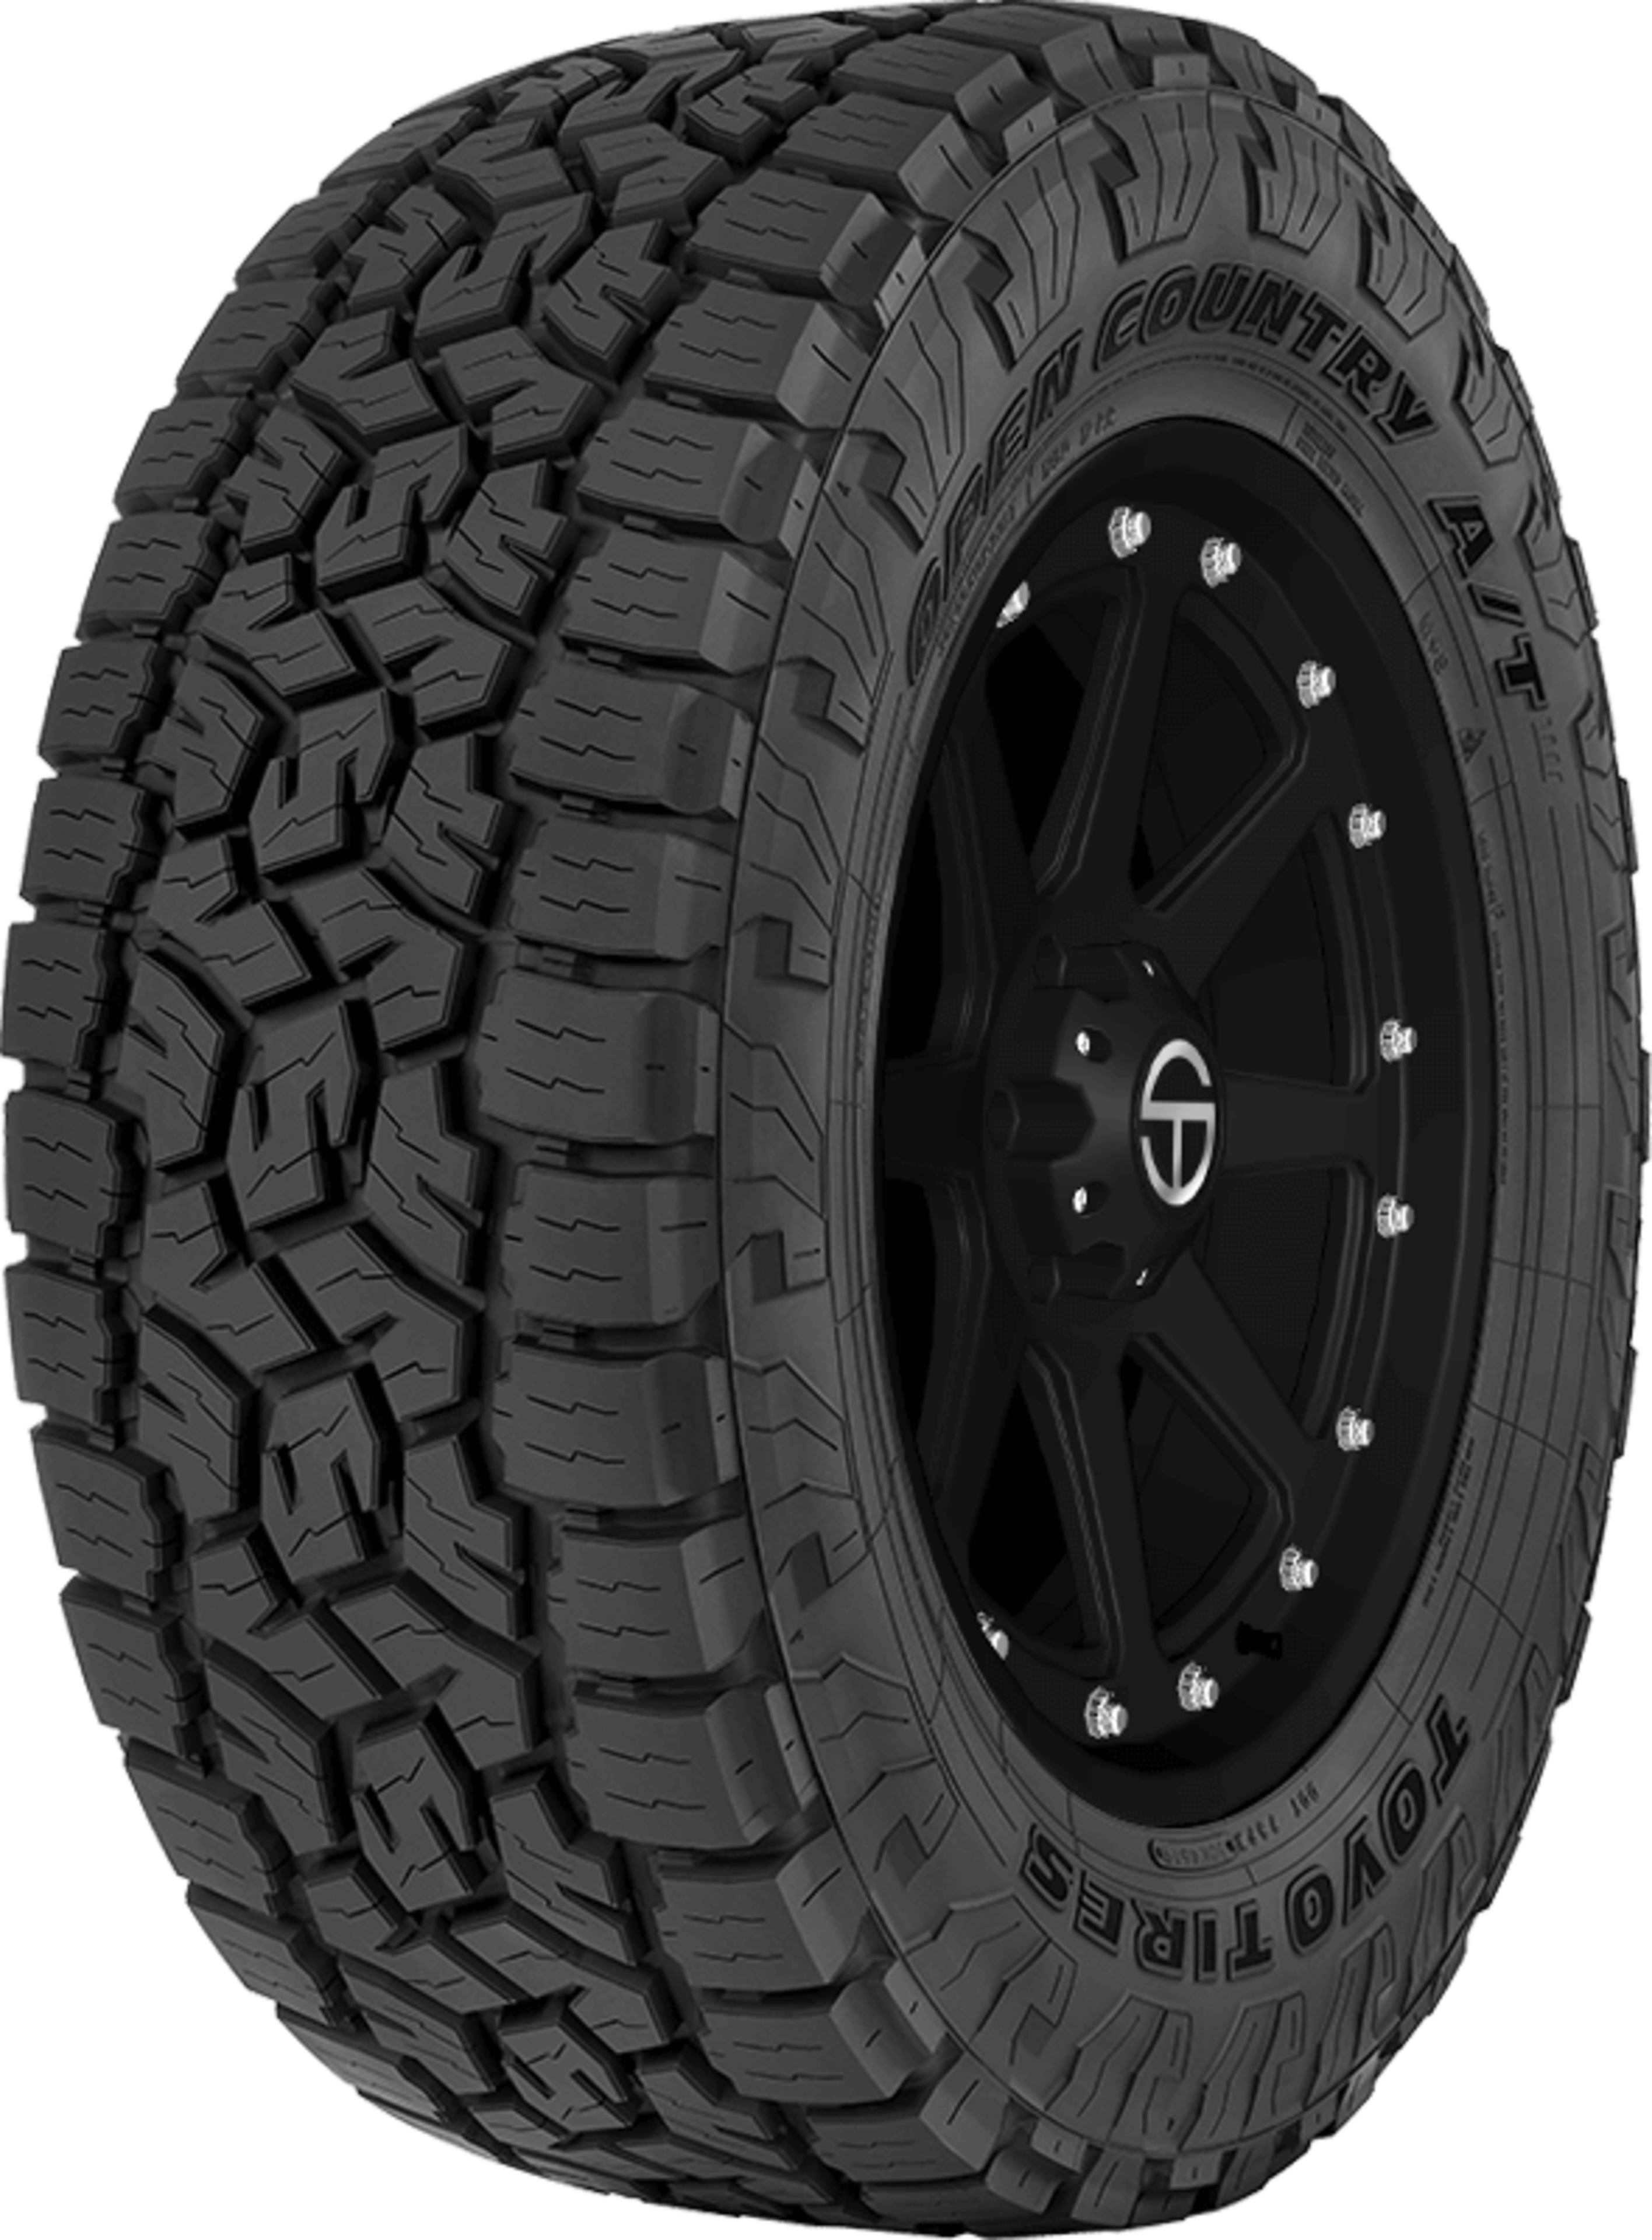 Buy Toyo Open Country A/T III Tires Online | SimpleTire